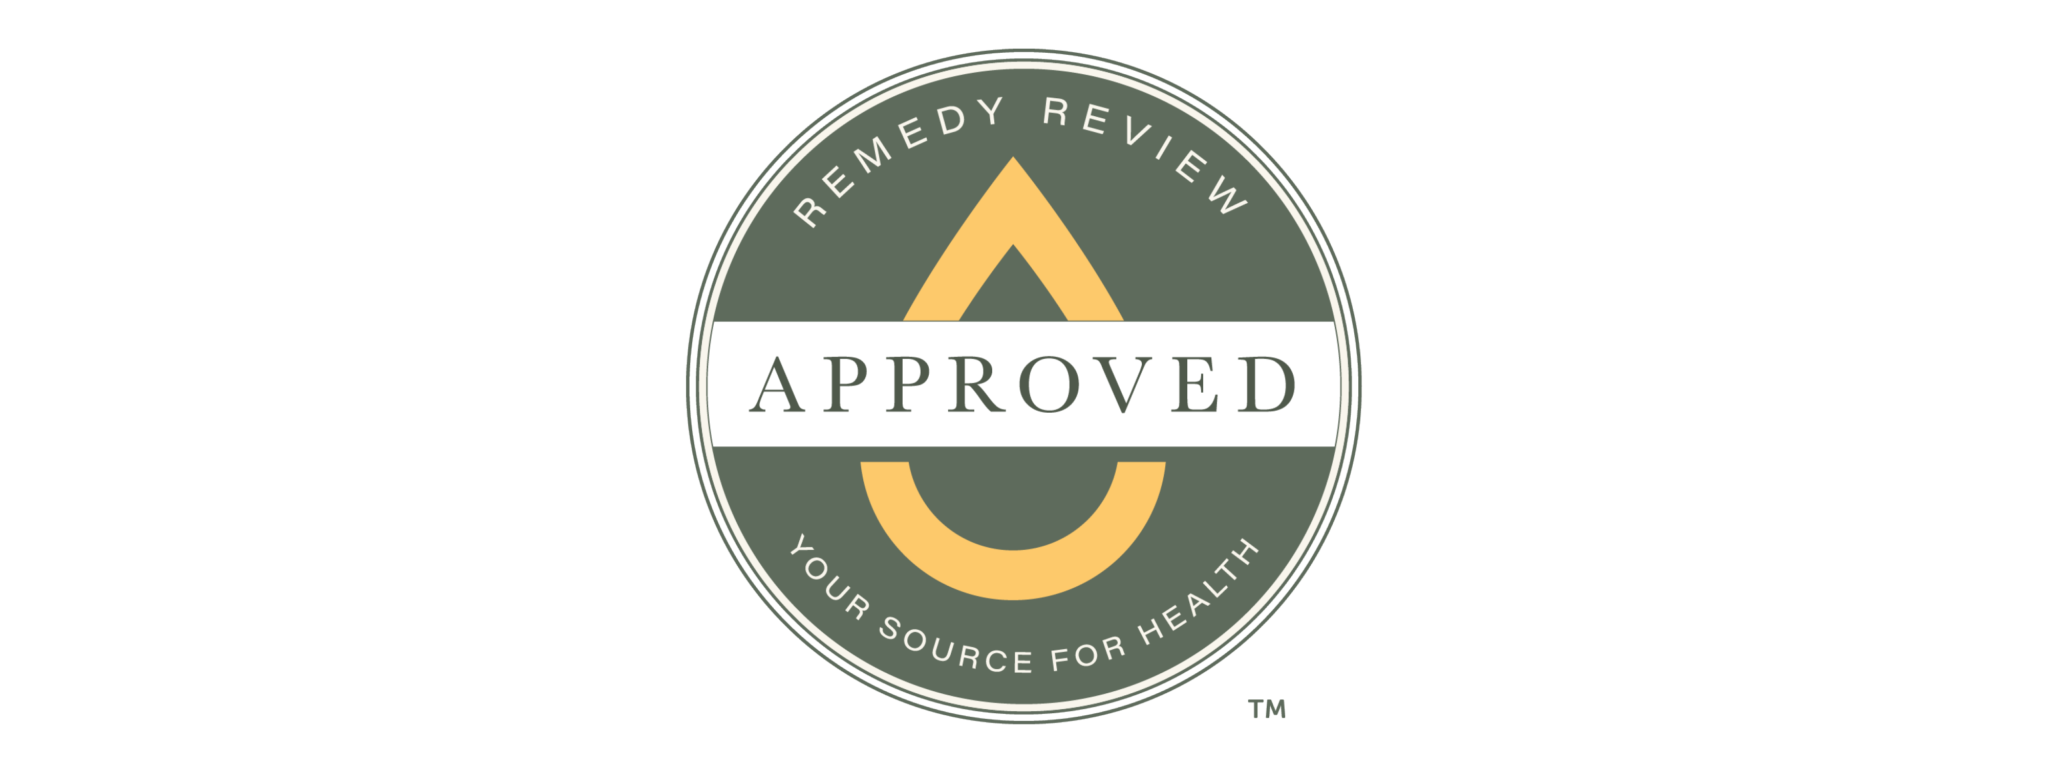 Remedy Review Seal of Approval